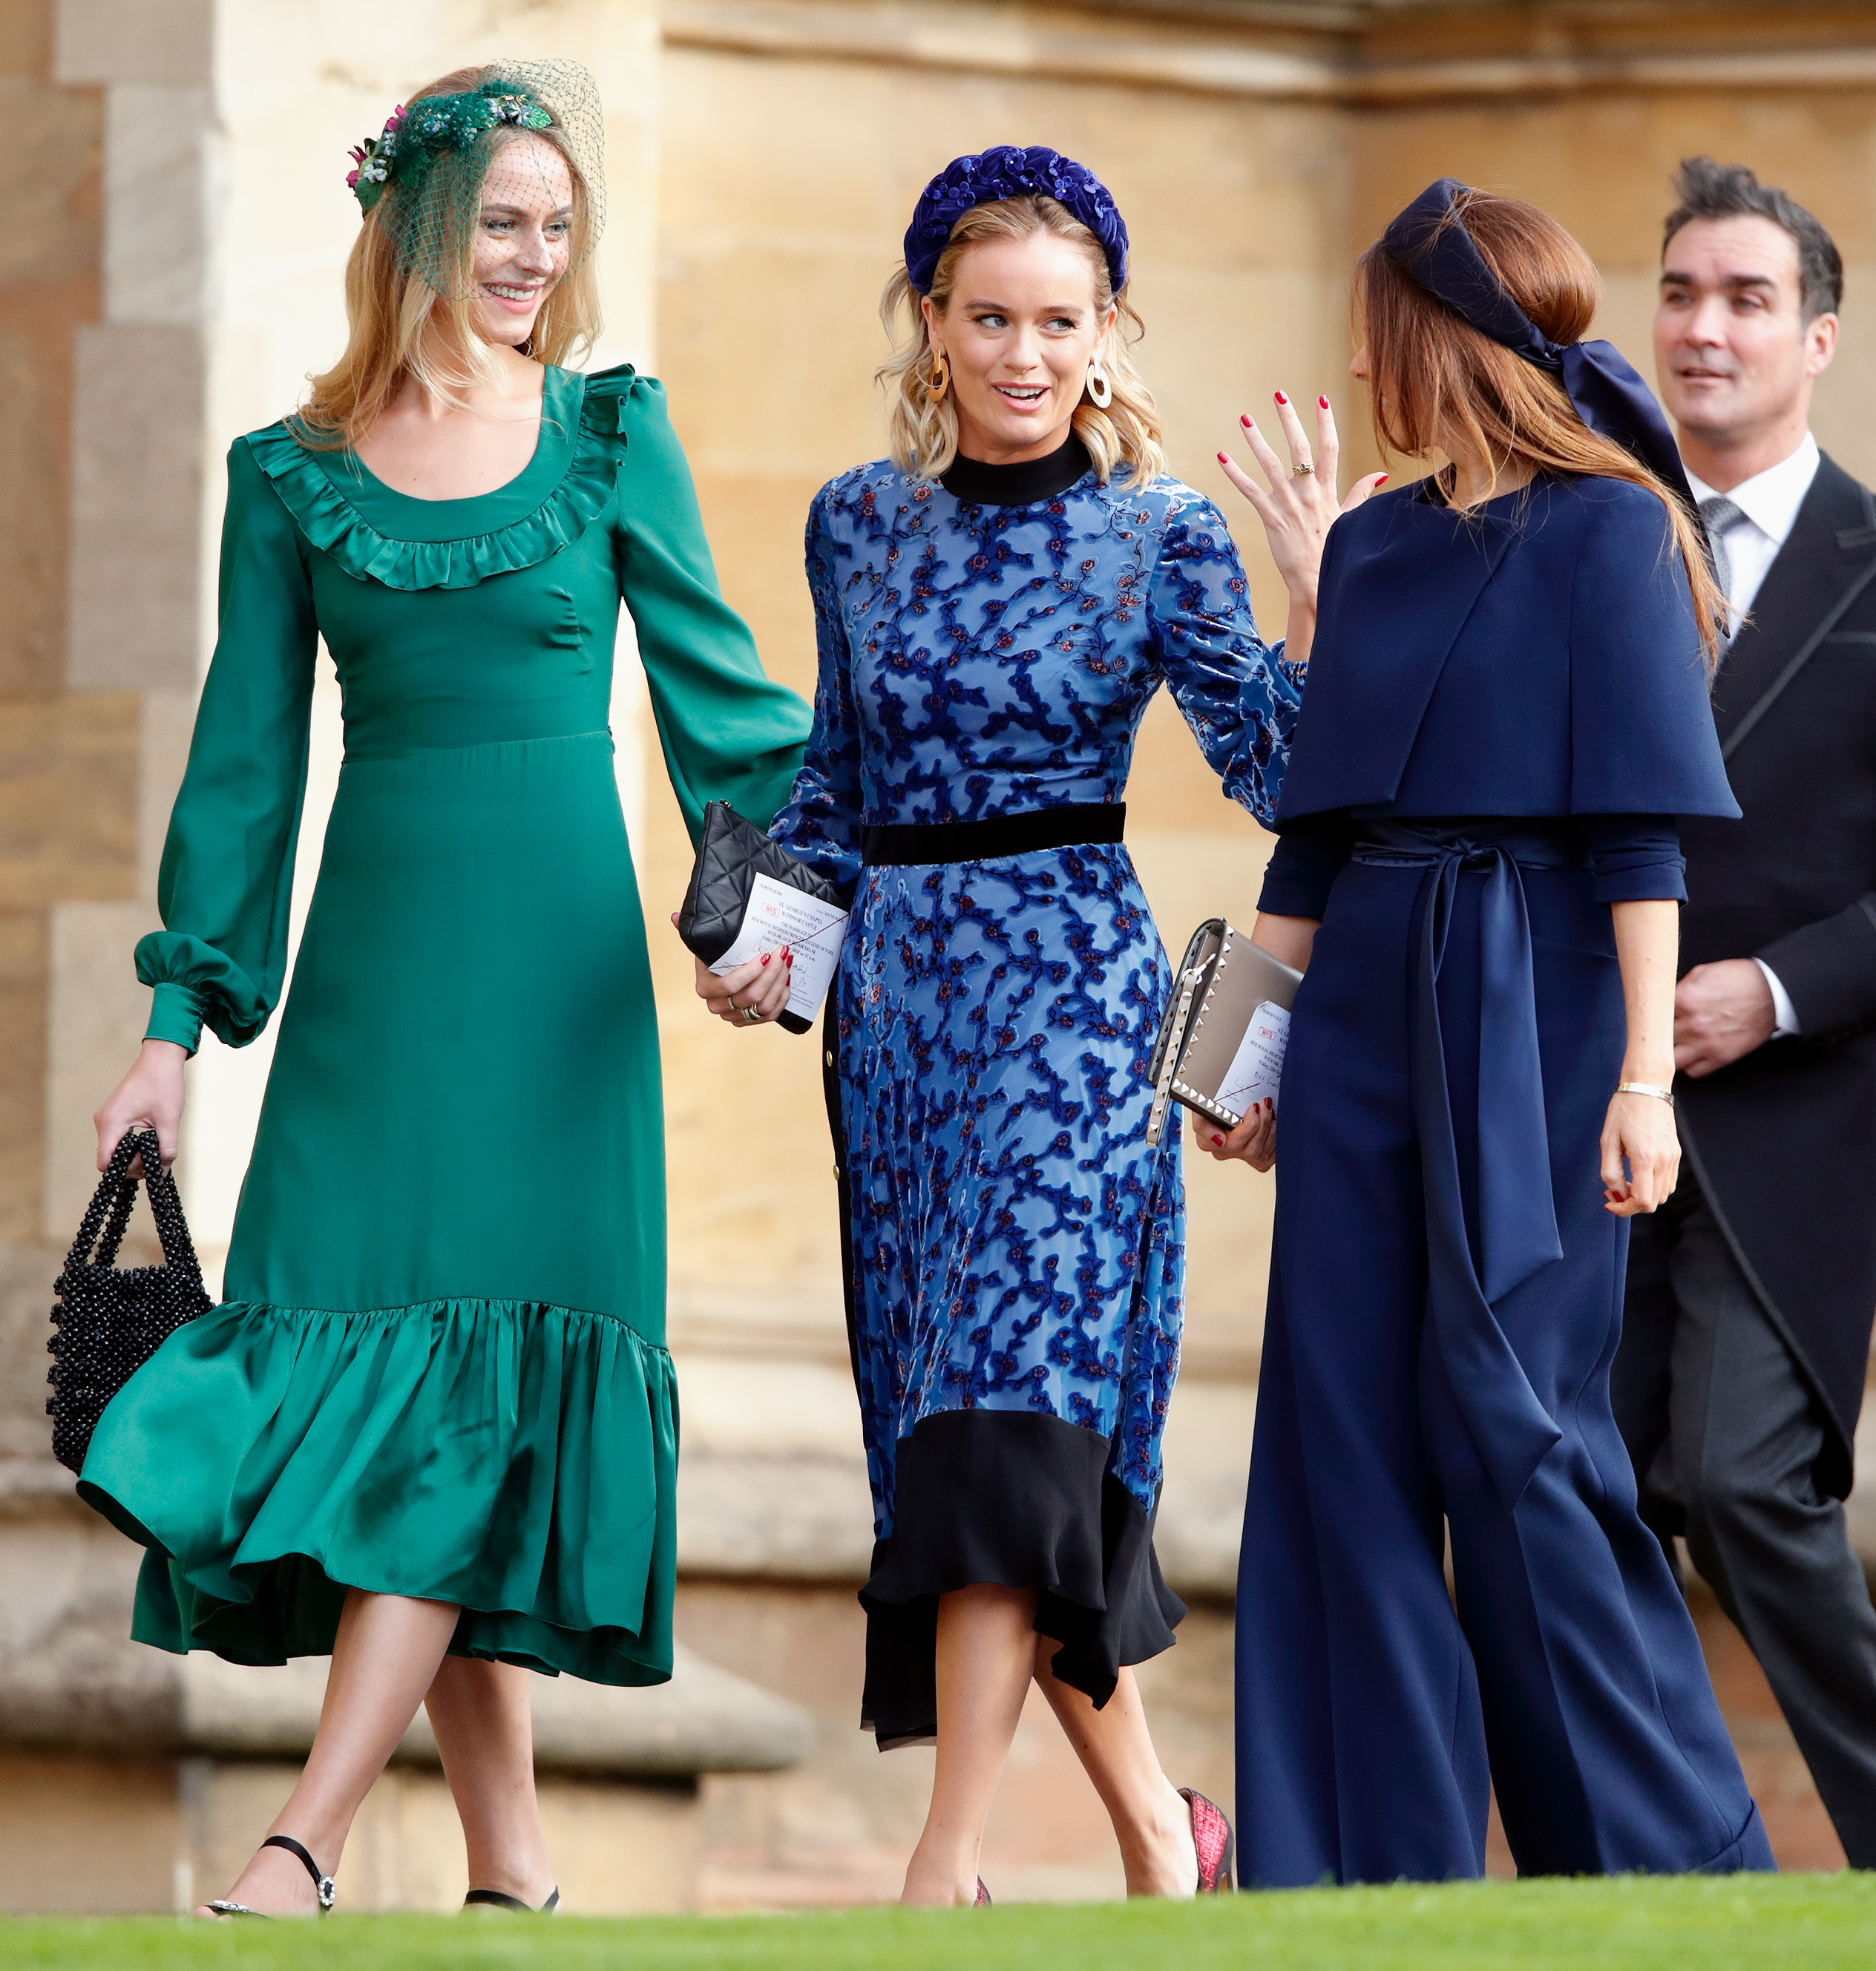 Cressida Bonas attends the wedding of Princess Eugenie and Jack Brooksbank at St George's Chapel on October 12, 2018 in Windsor, England. | Source: Getty Images